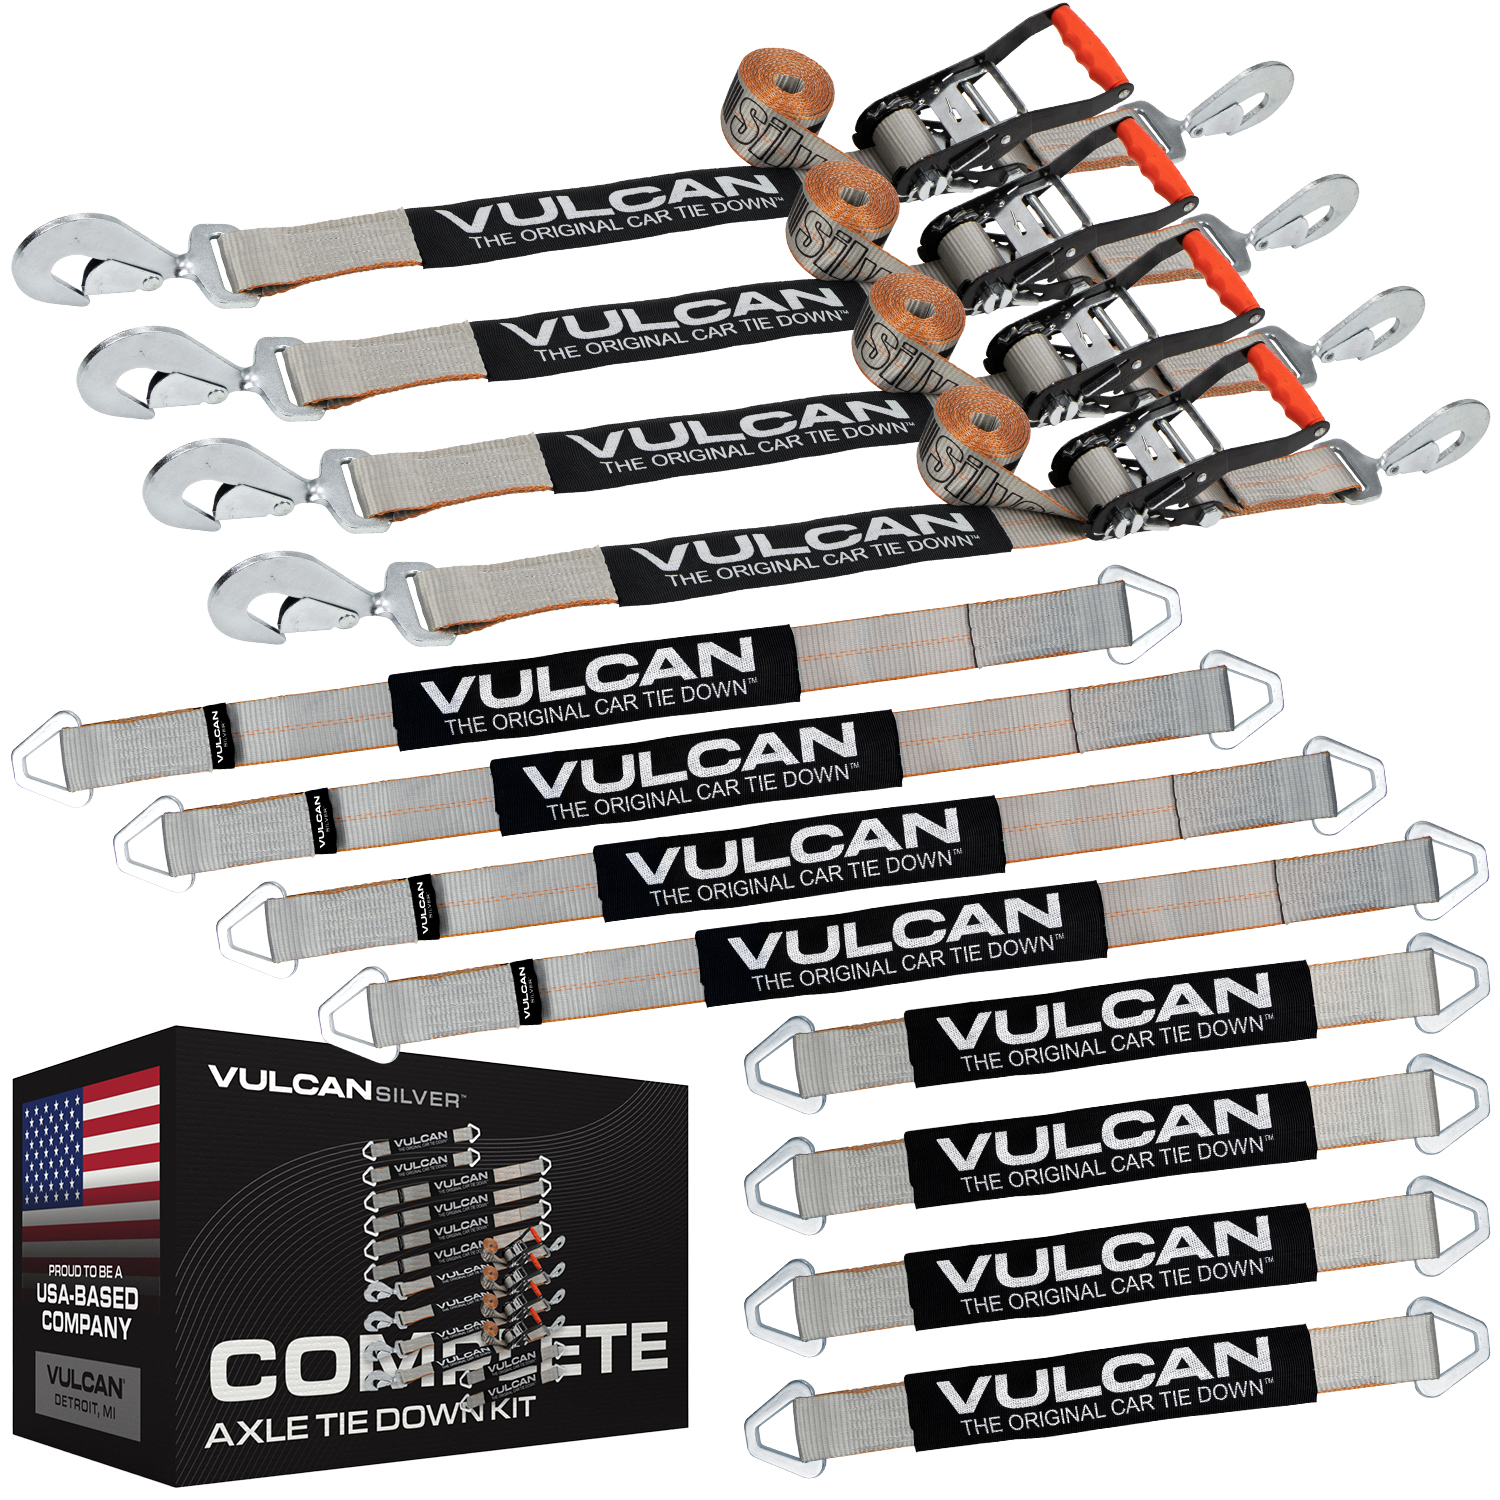 VULCAN Complete Axle Strap Tie Down Kit with Snap Hook Ratchet Straps -  Includes (4) 22 Axle Straps, (4) 36 Axle Straps, And (4) 8' Snap Hook  Ratchet Straps